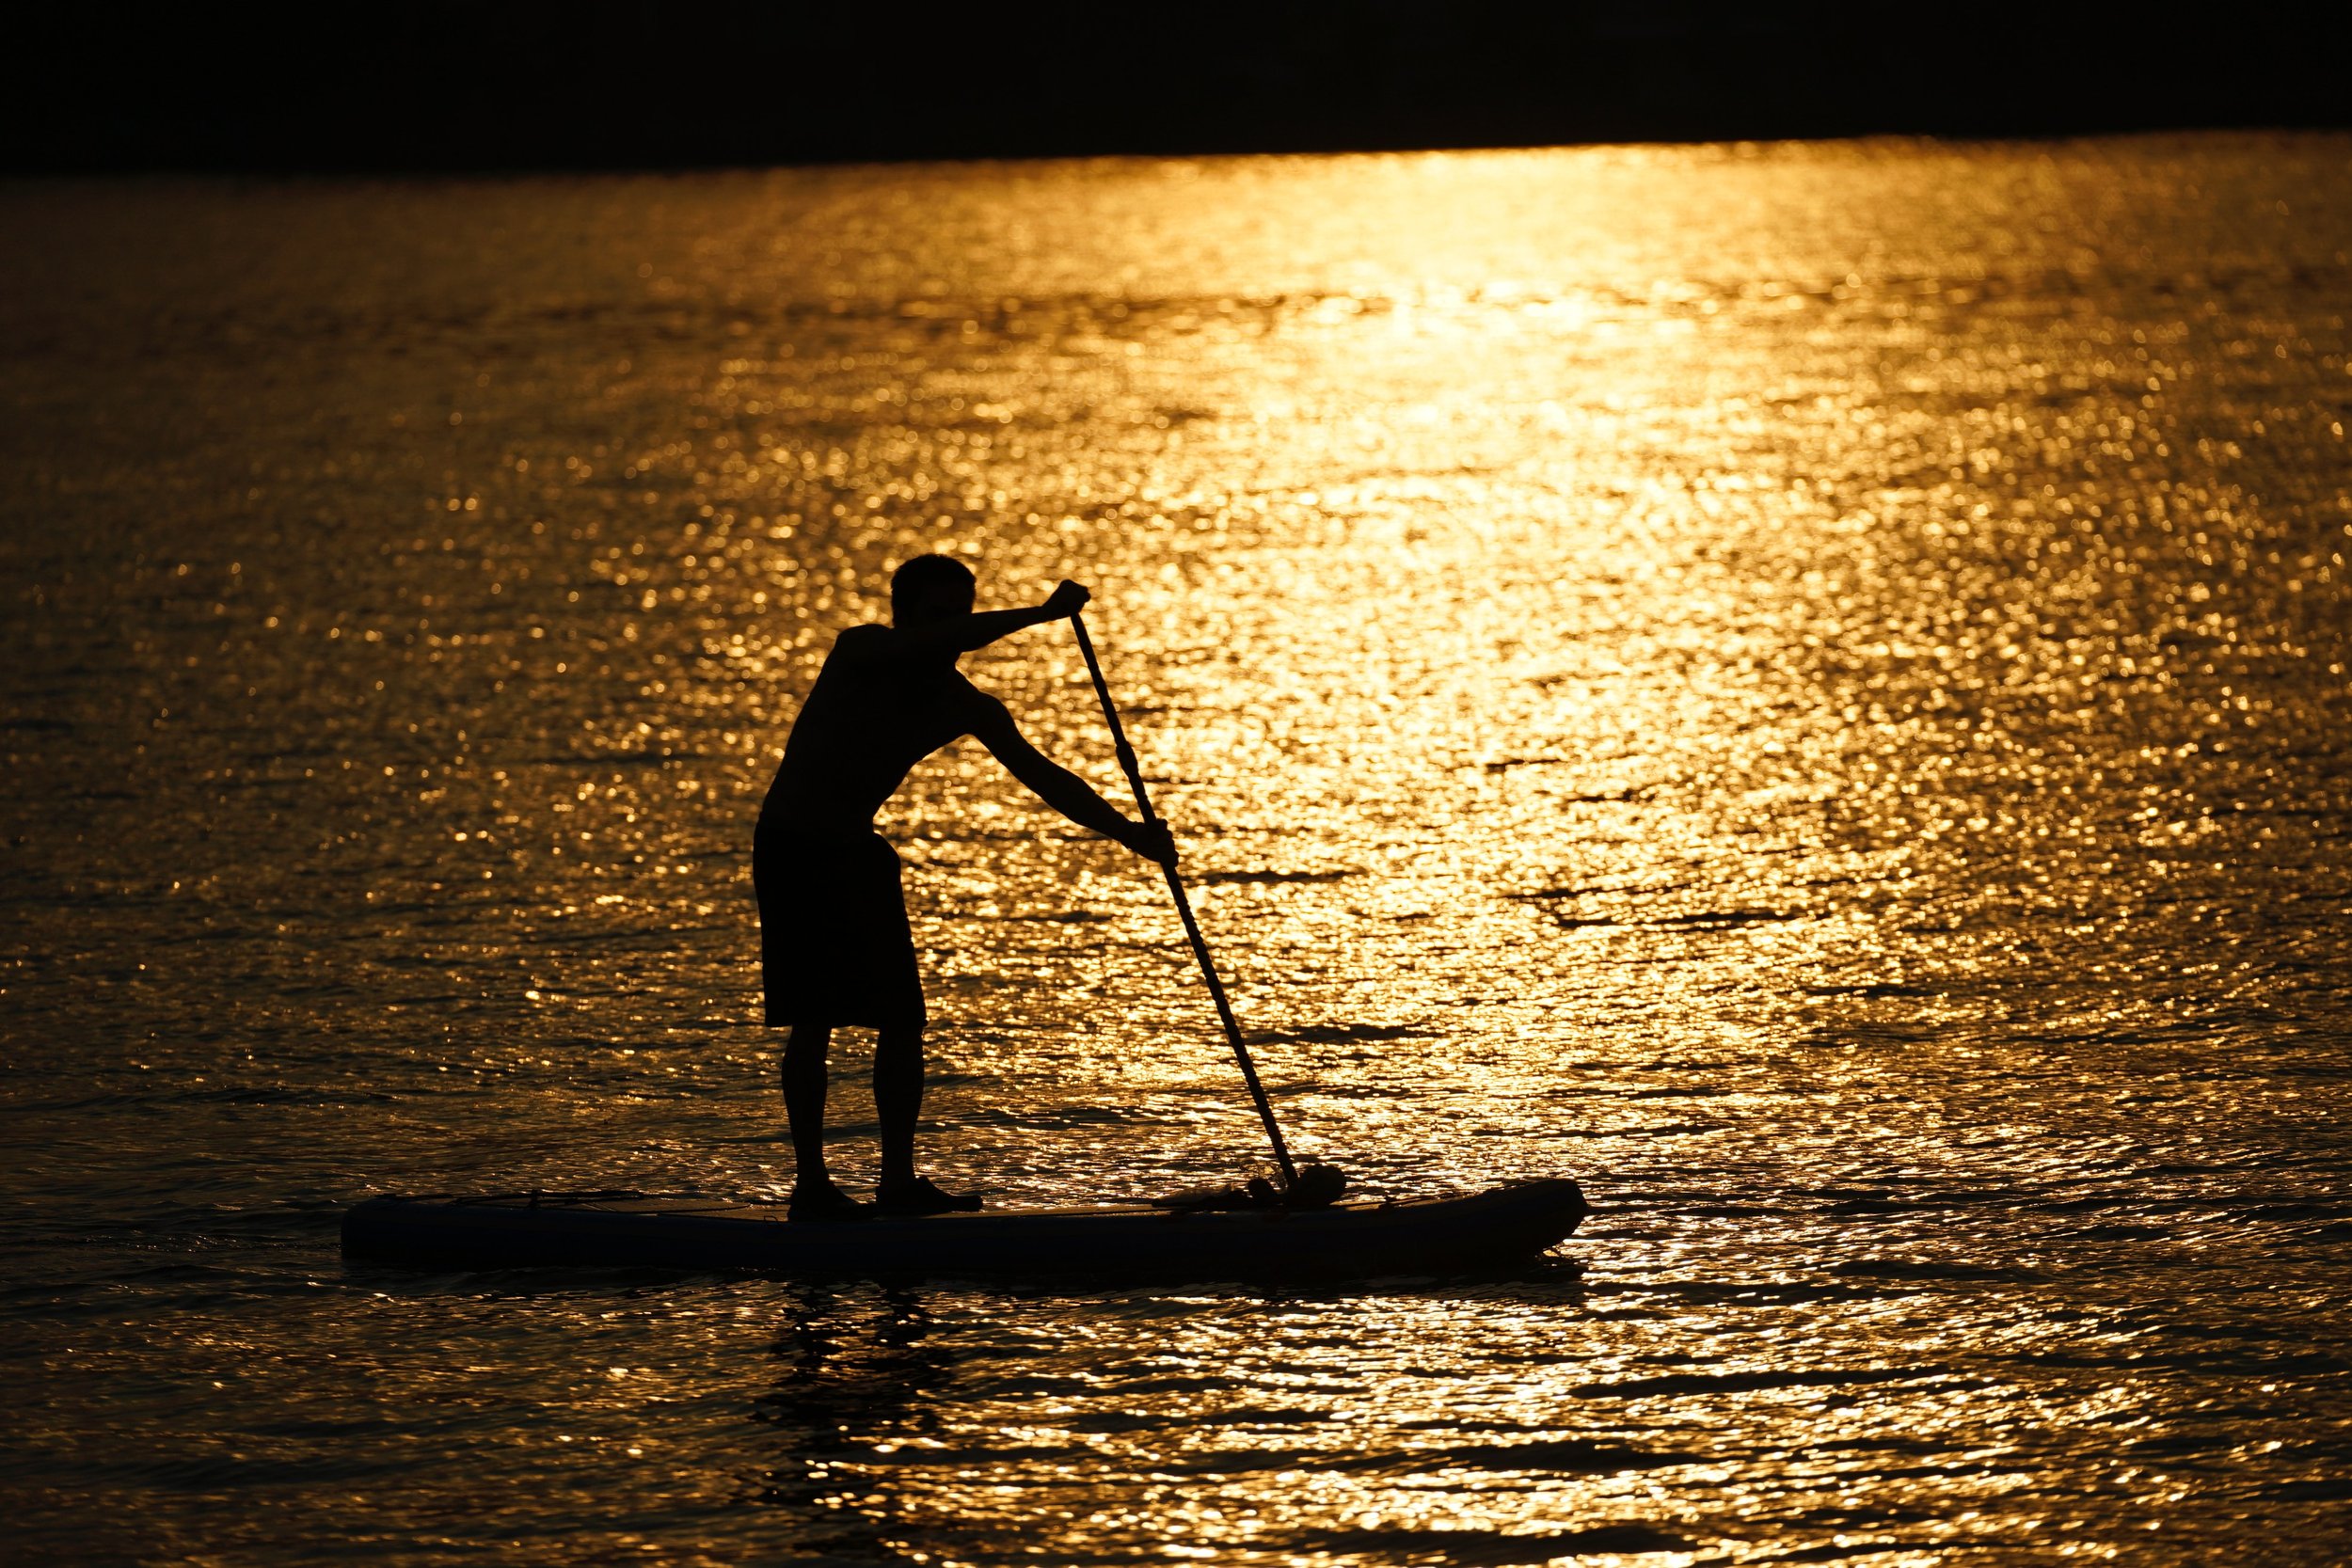 stand-up-paddle-board-oklahoma